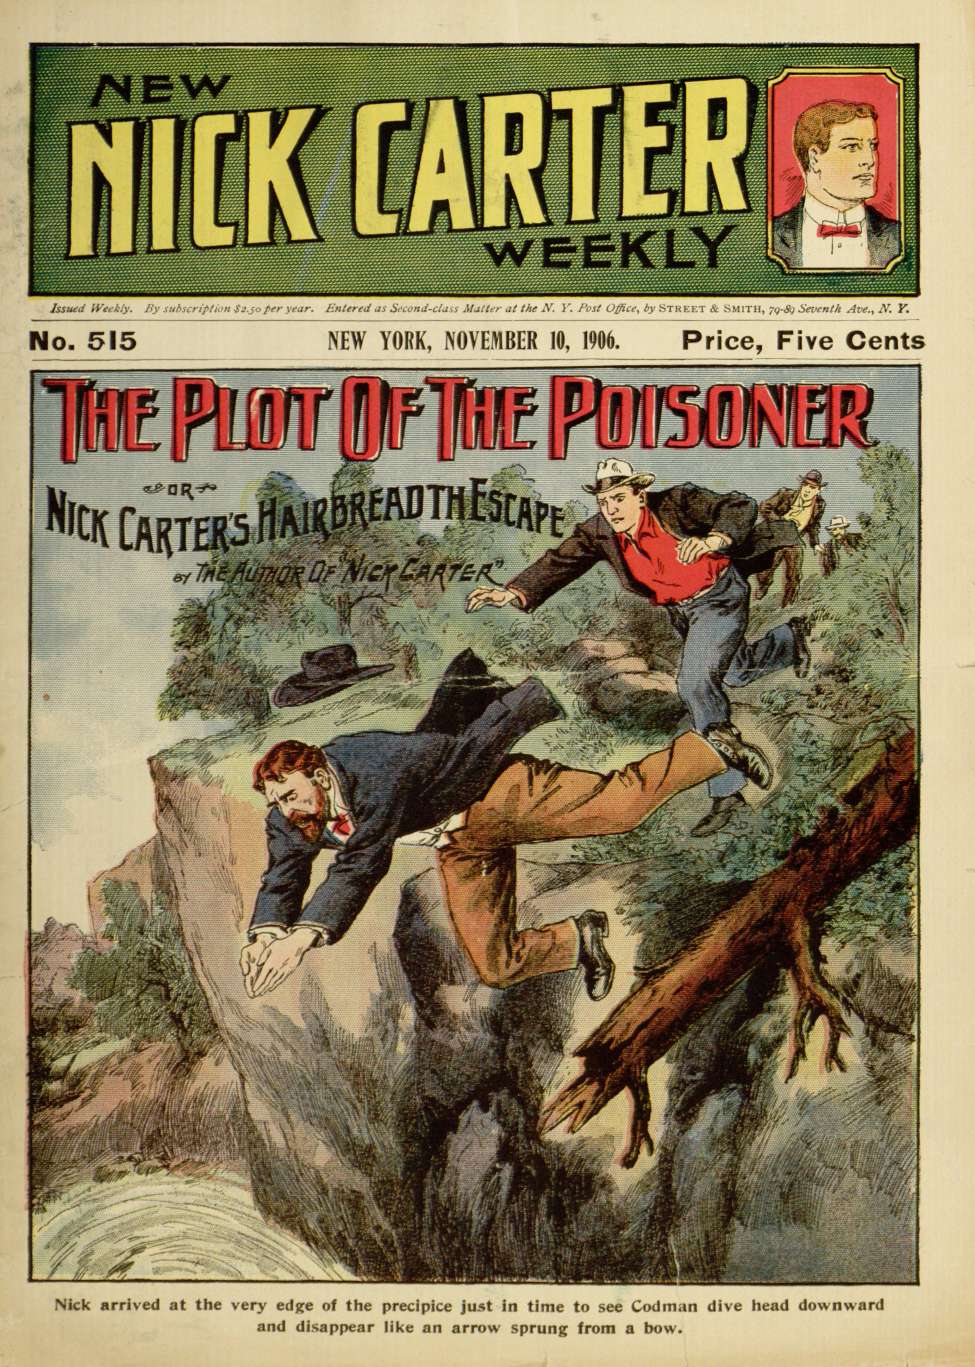 Comic Book Cover For New Nick Carter Weekly 515 - Plot of the Poisoner